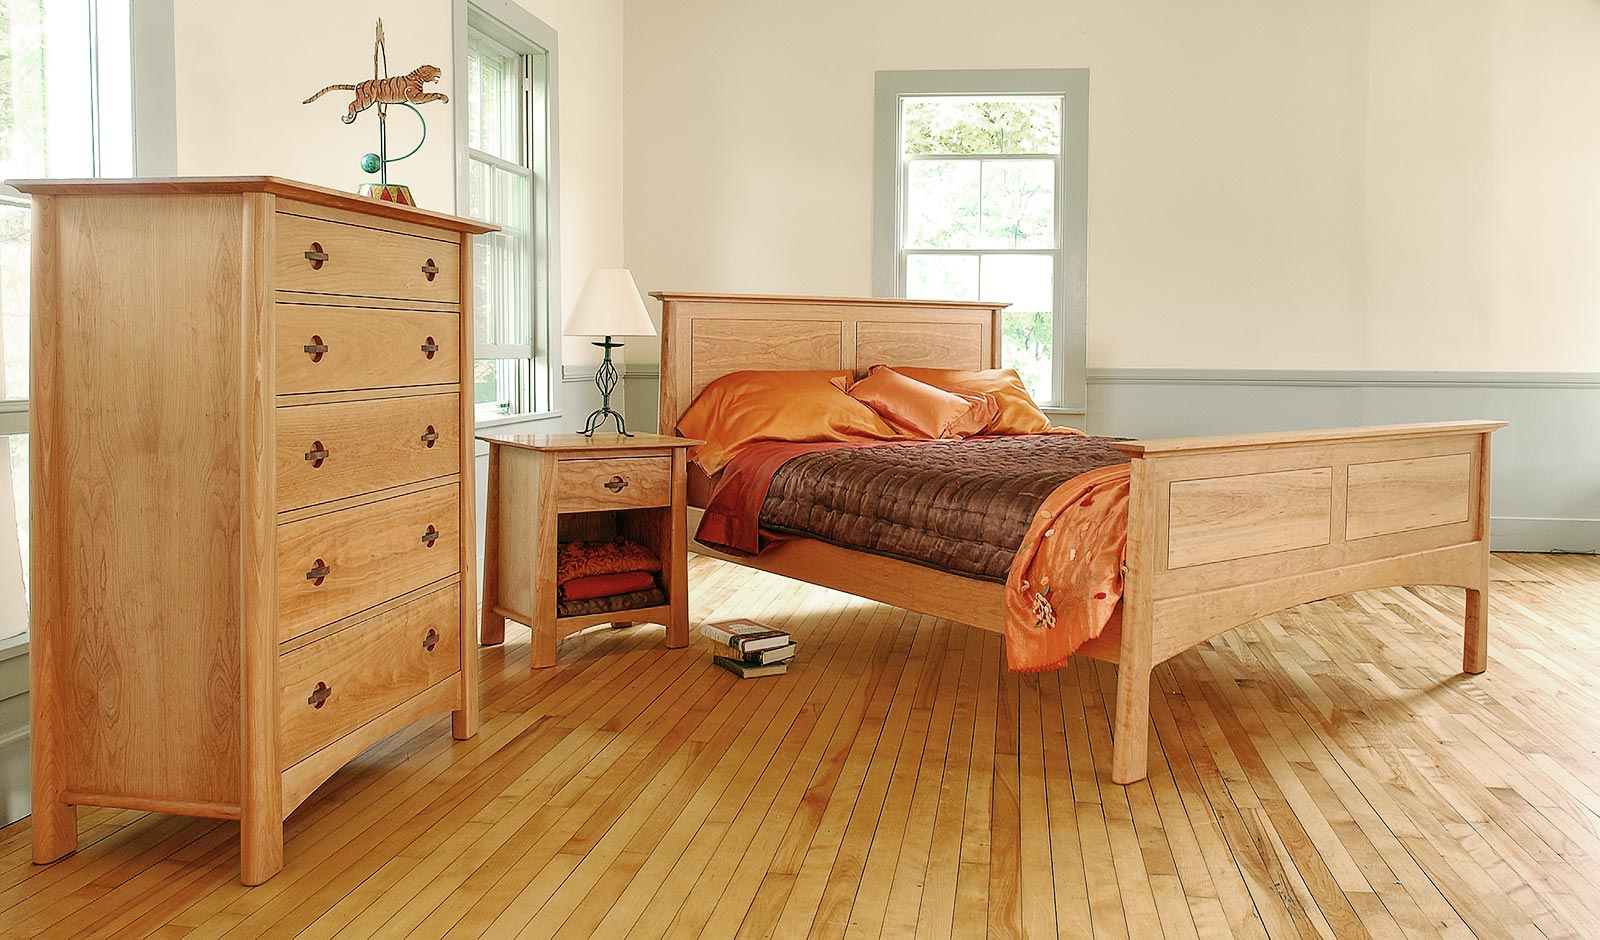 Harvestmoon Panel Bed in cherry with matching chest and nightstand from Maple Corner Woodworks